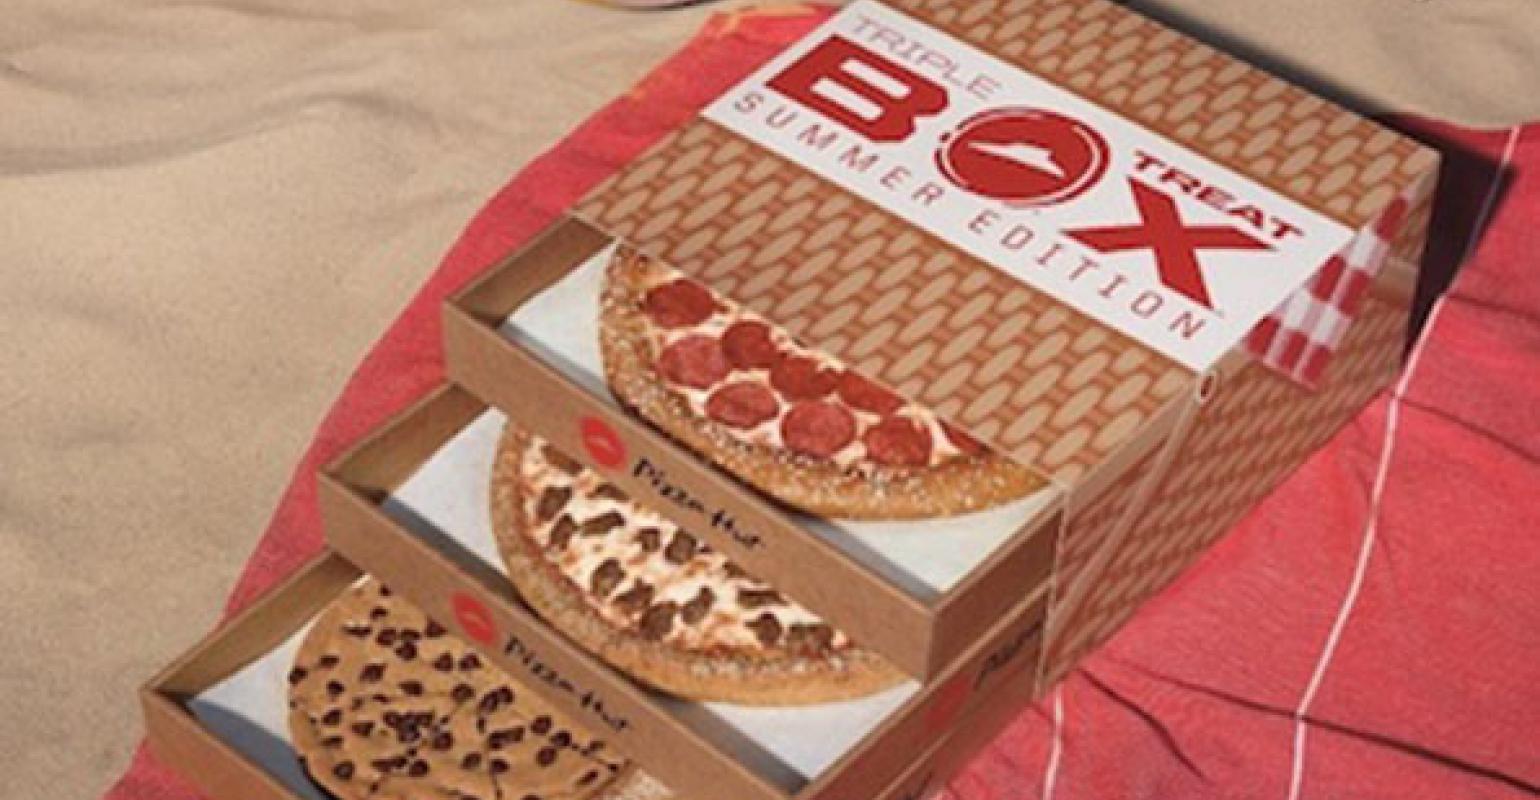 Pizza Hut Brings Back Cardboard Pizza Dresser For The Holidays